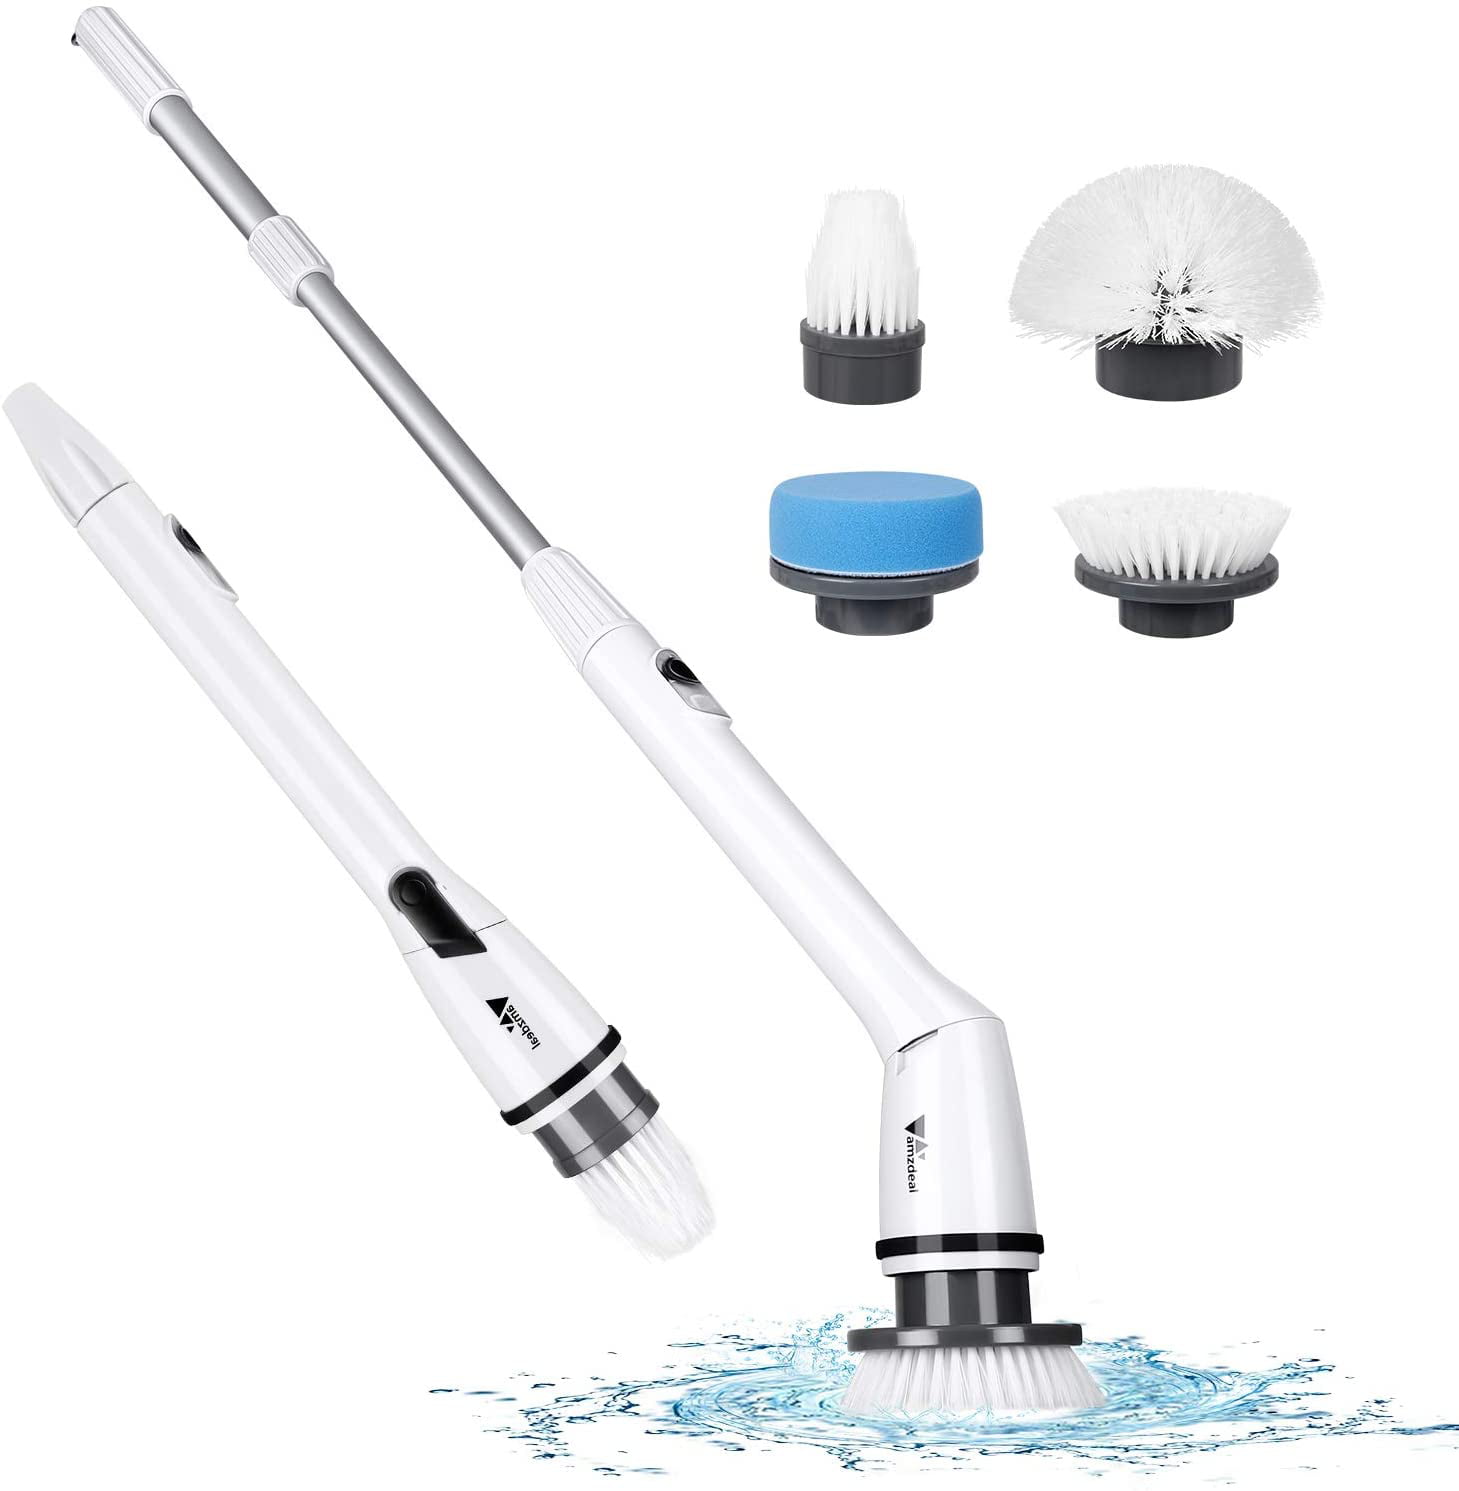 Amzdeal Electric Spin Scrubber Machine, Cordless Bathtub Cleaner